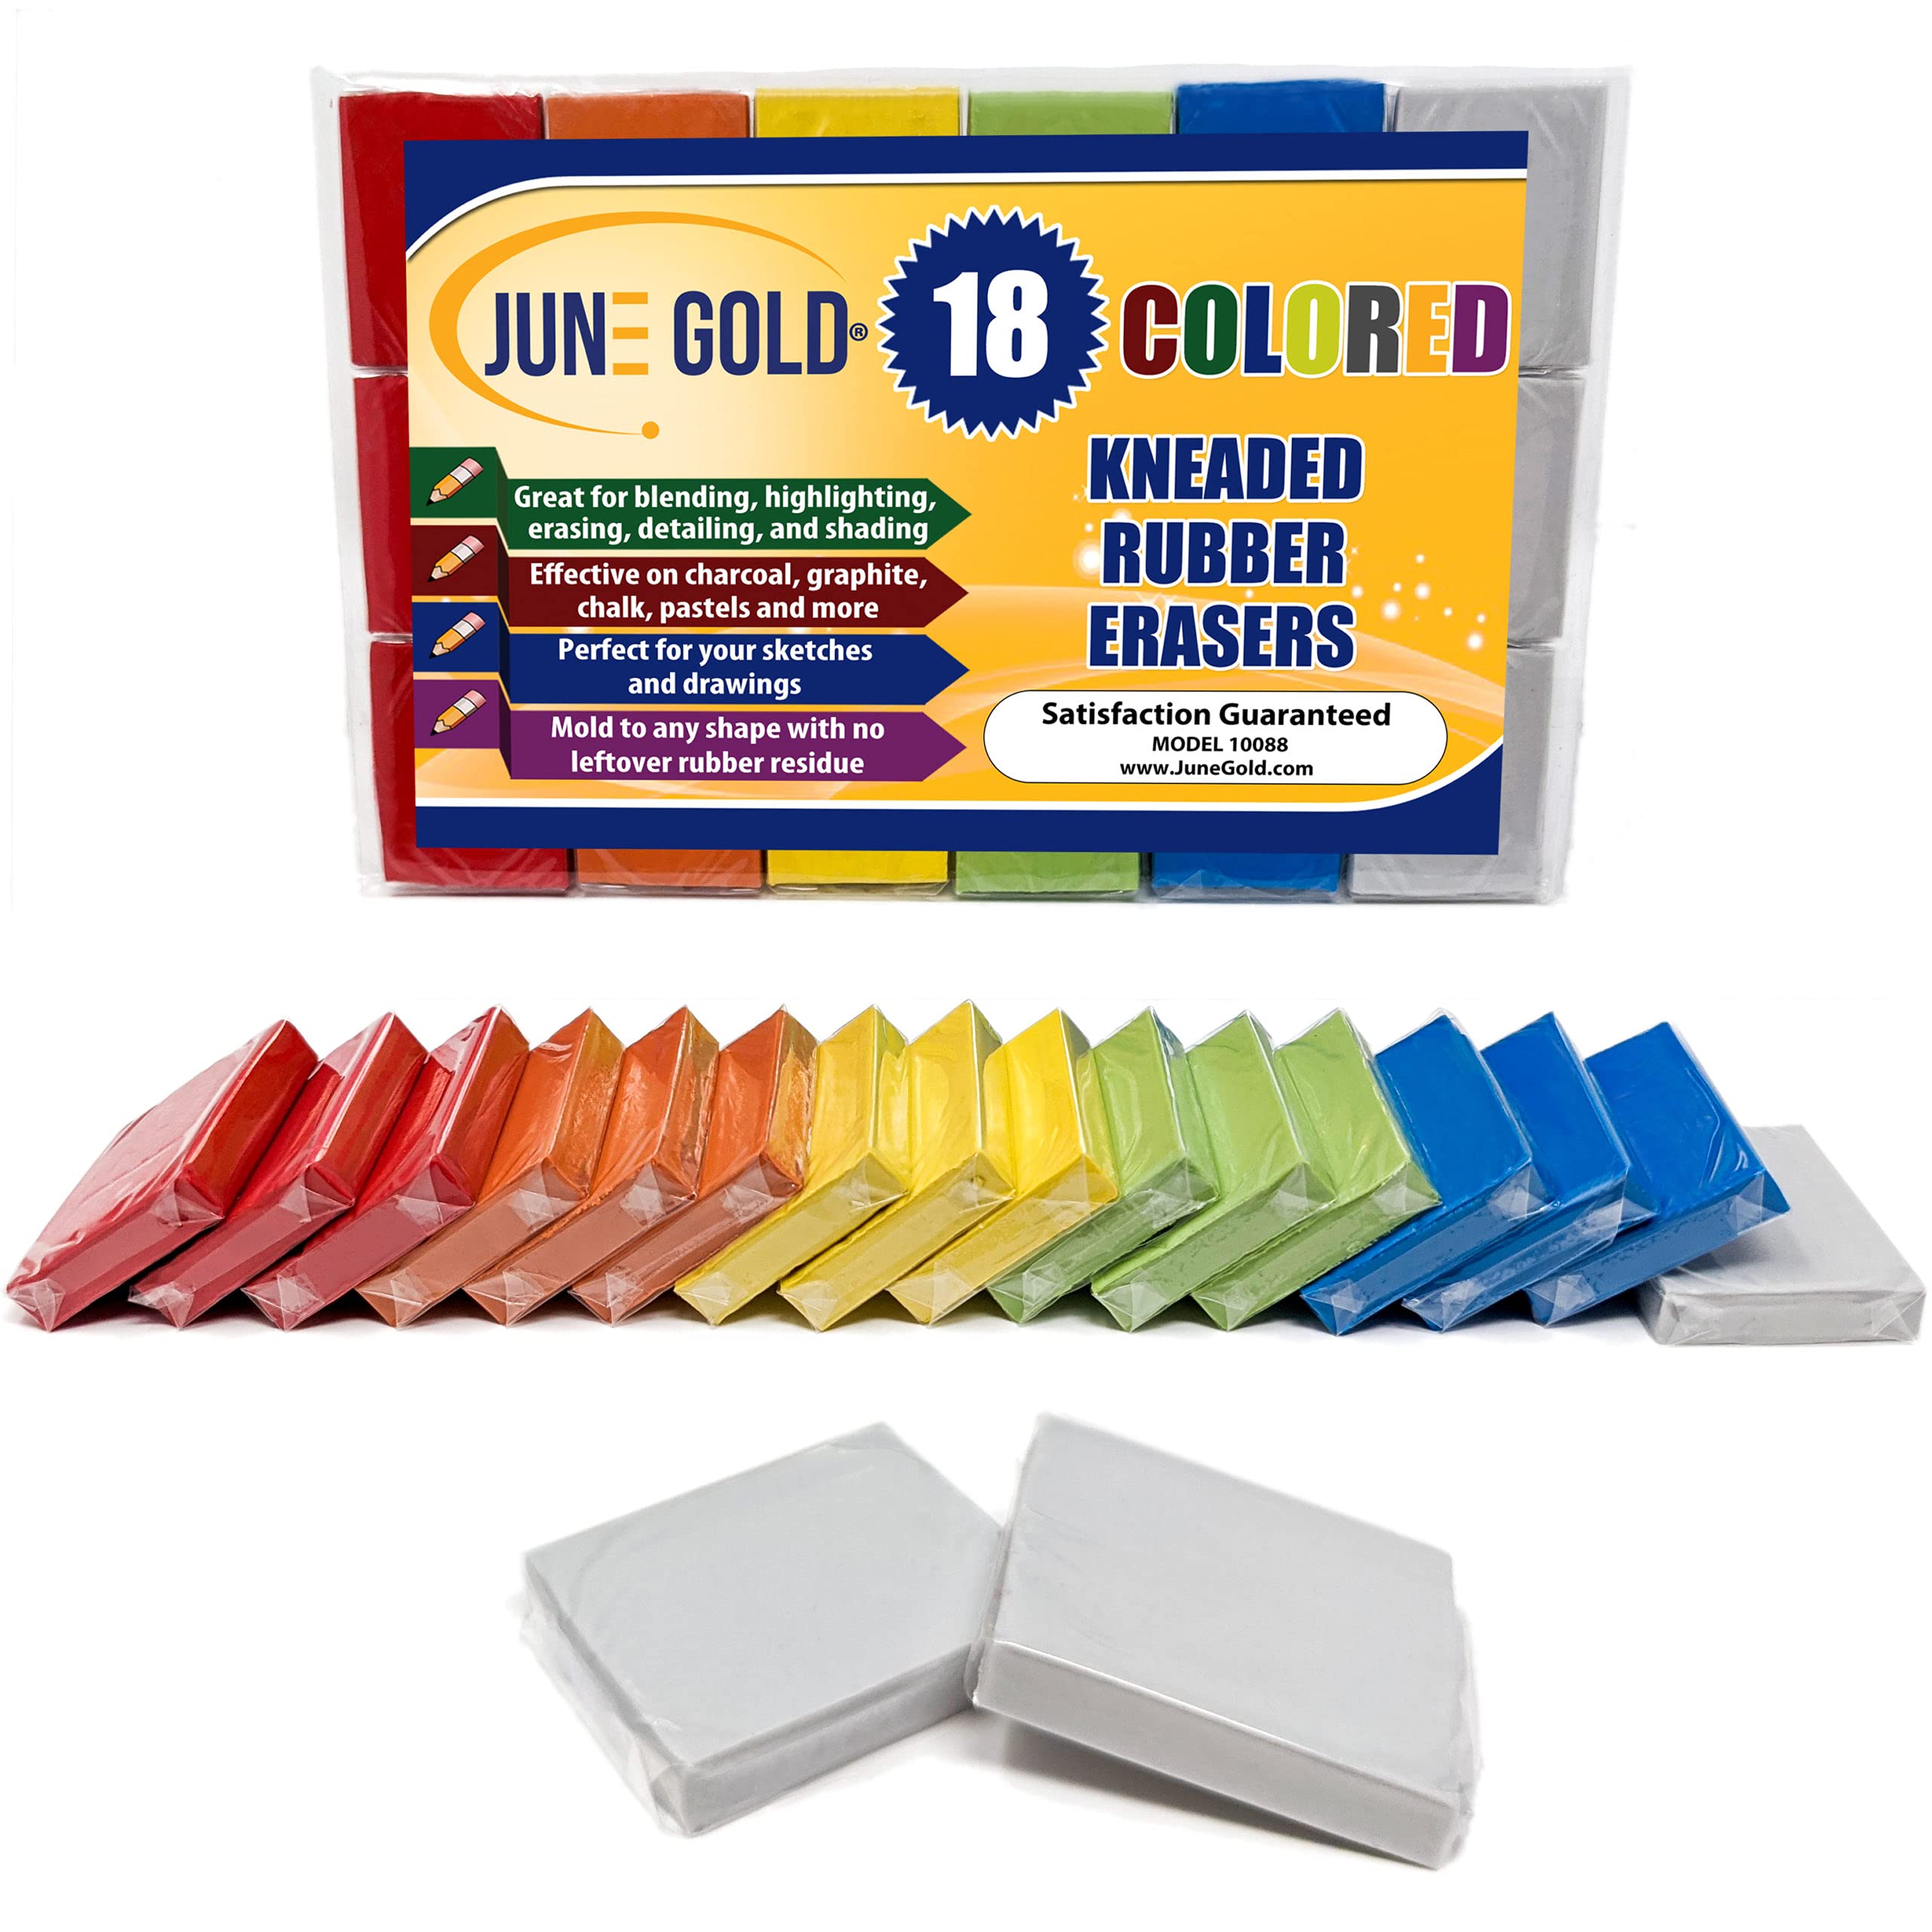 June Gold Kneaded Rubber Erasers Colored 18 Pack - Blend Shade Smooth  Correct and Brighten Your Sketches and Drawings